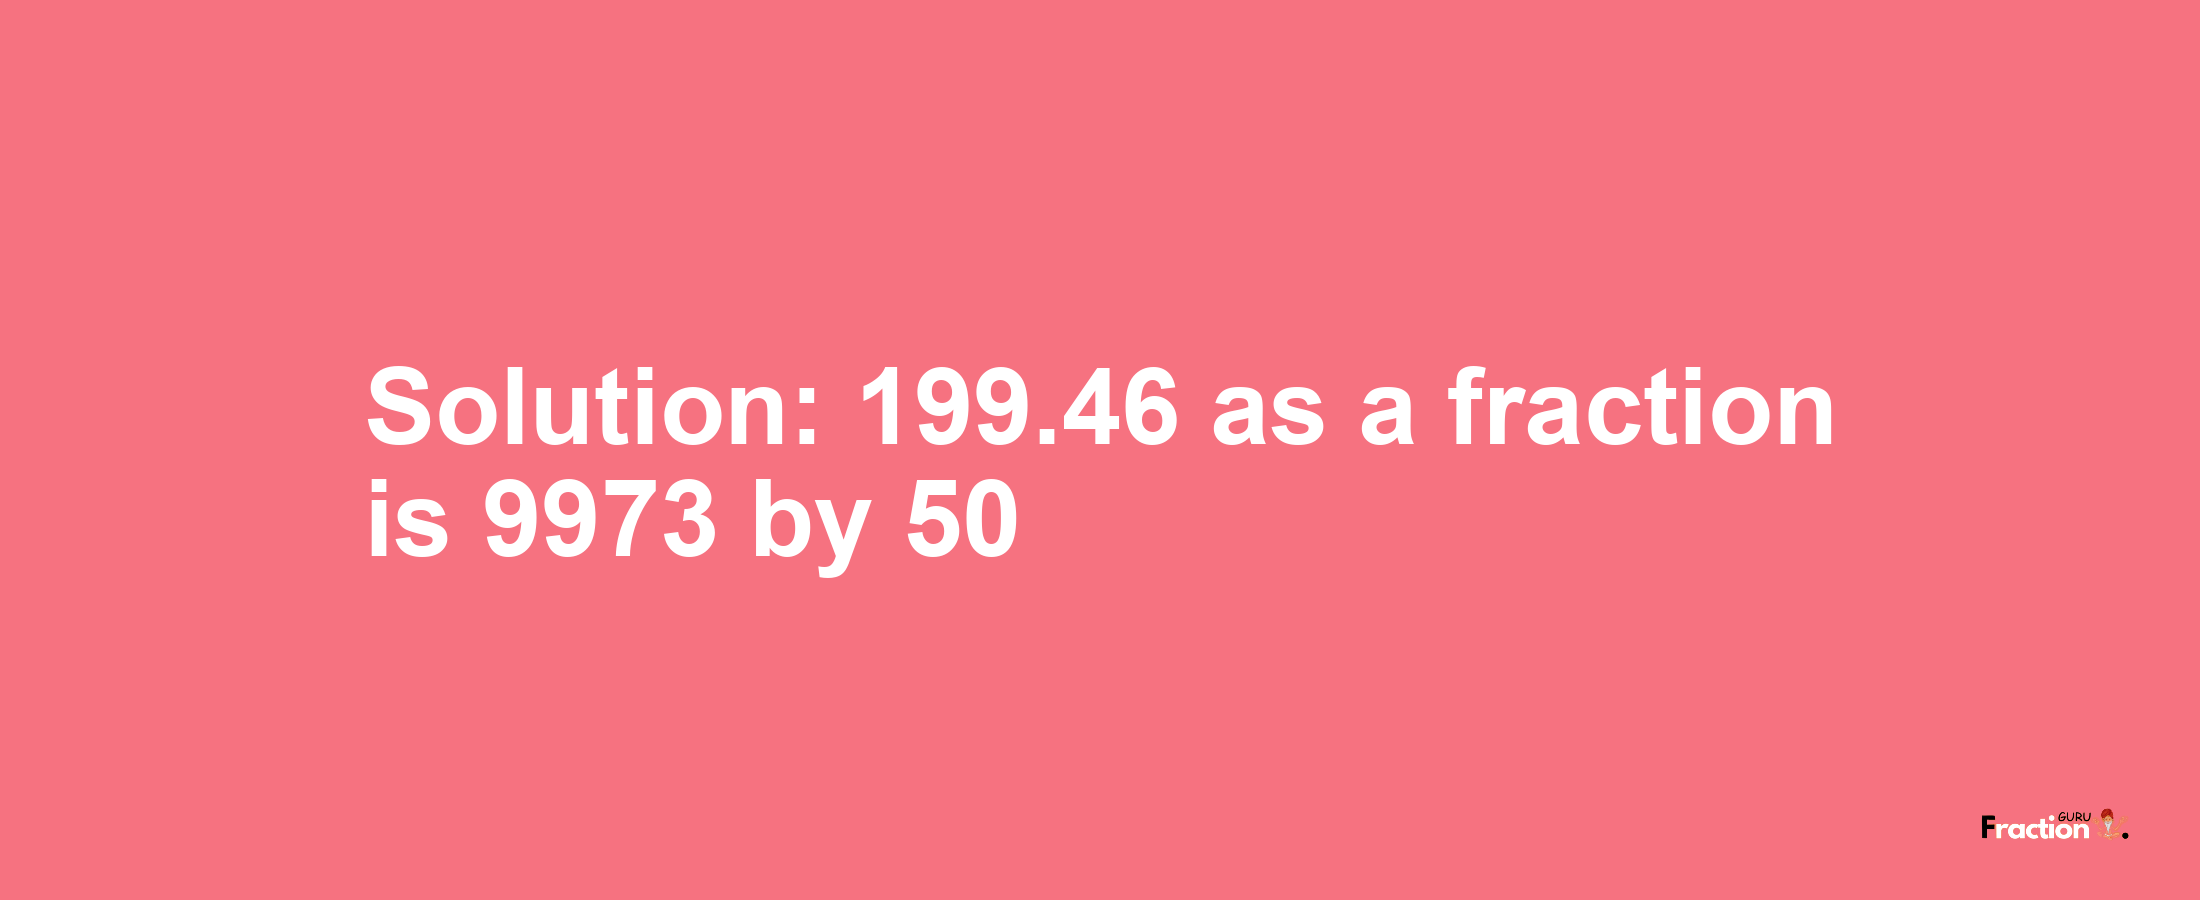 Solution:199.46 as a fraction is 9973/50